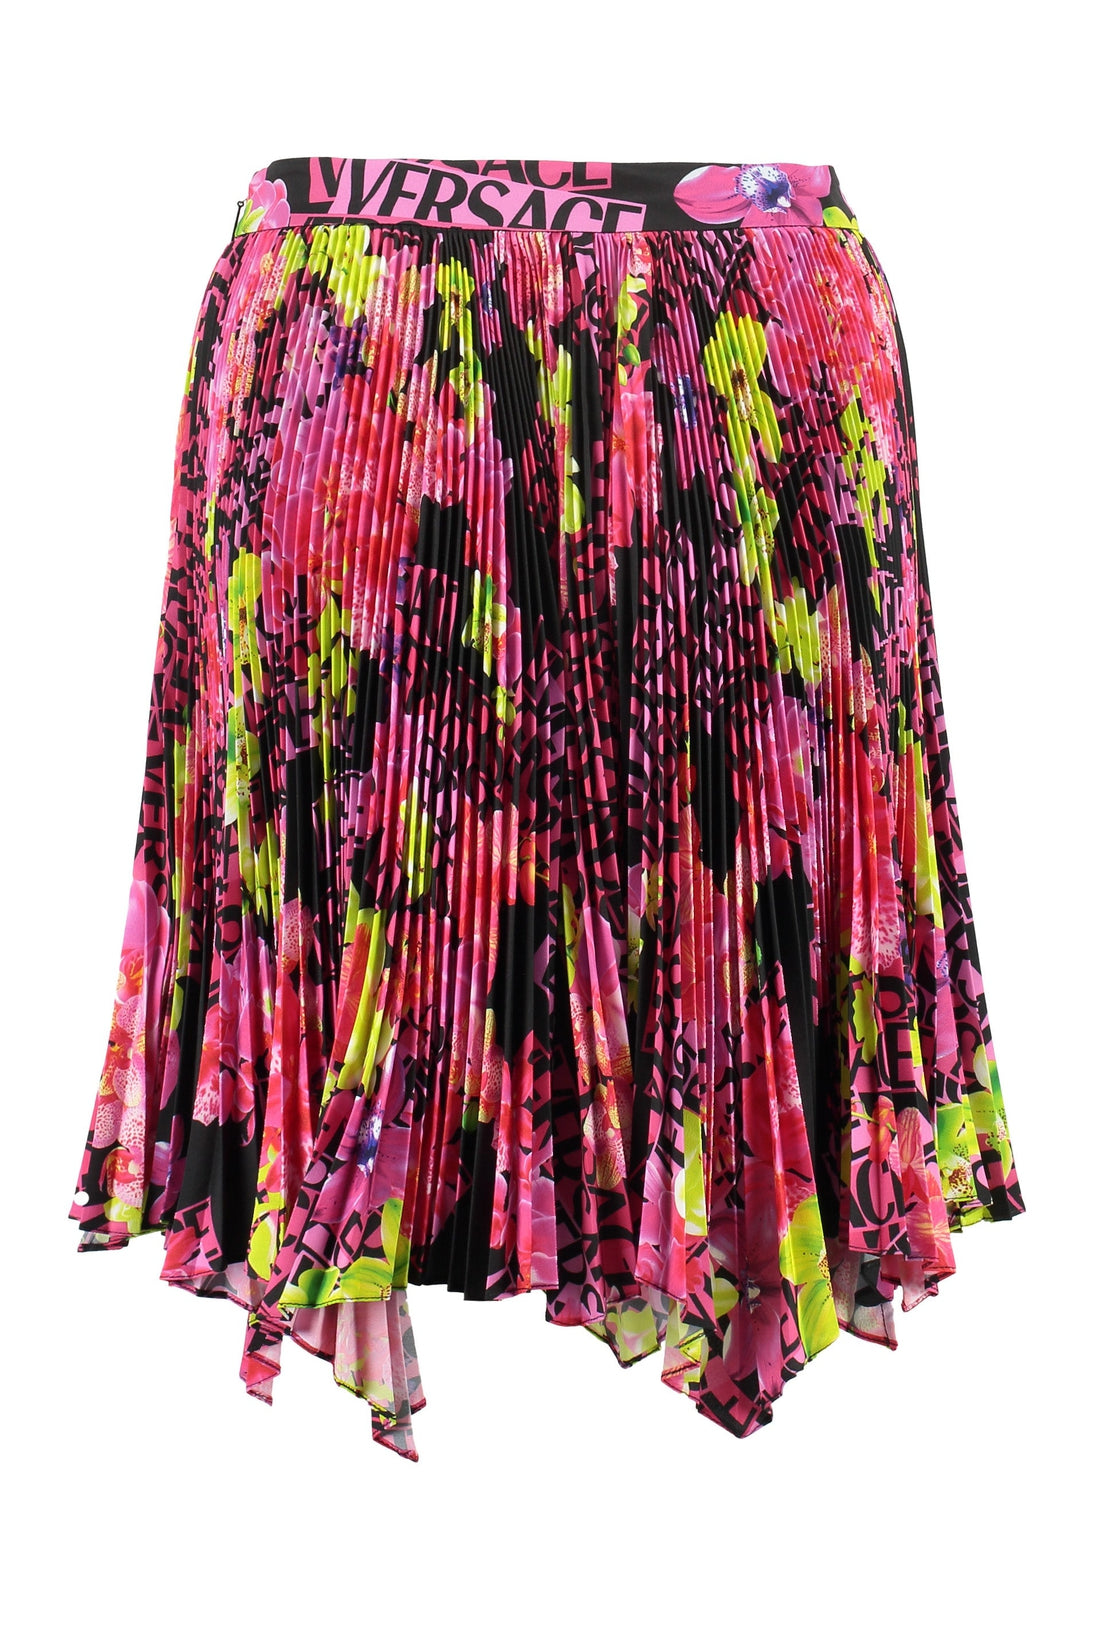 Versace-OUTLET-SALE-Printed pleated skirt-ARCHIVIST